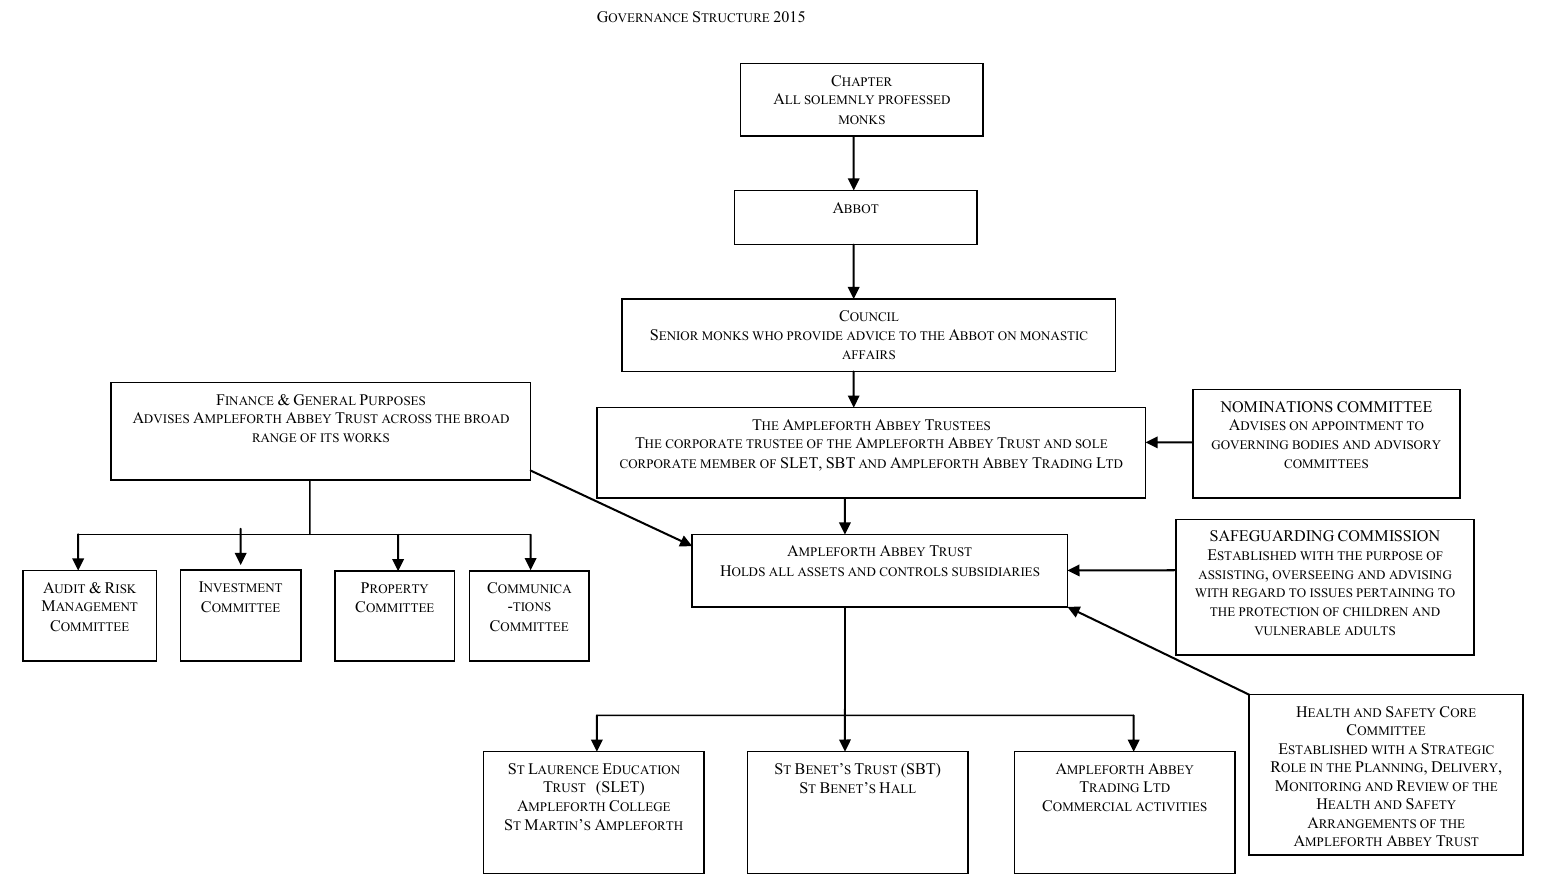 A flow diagram of the Ampleforth Governance Structure 2015